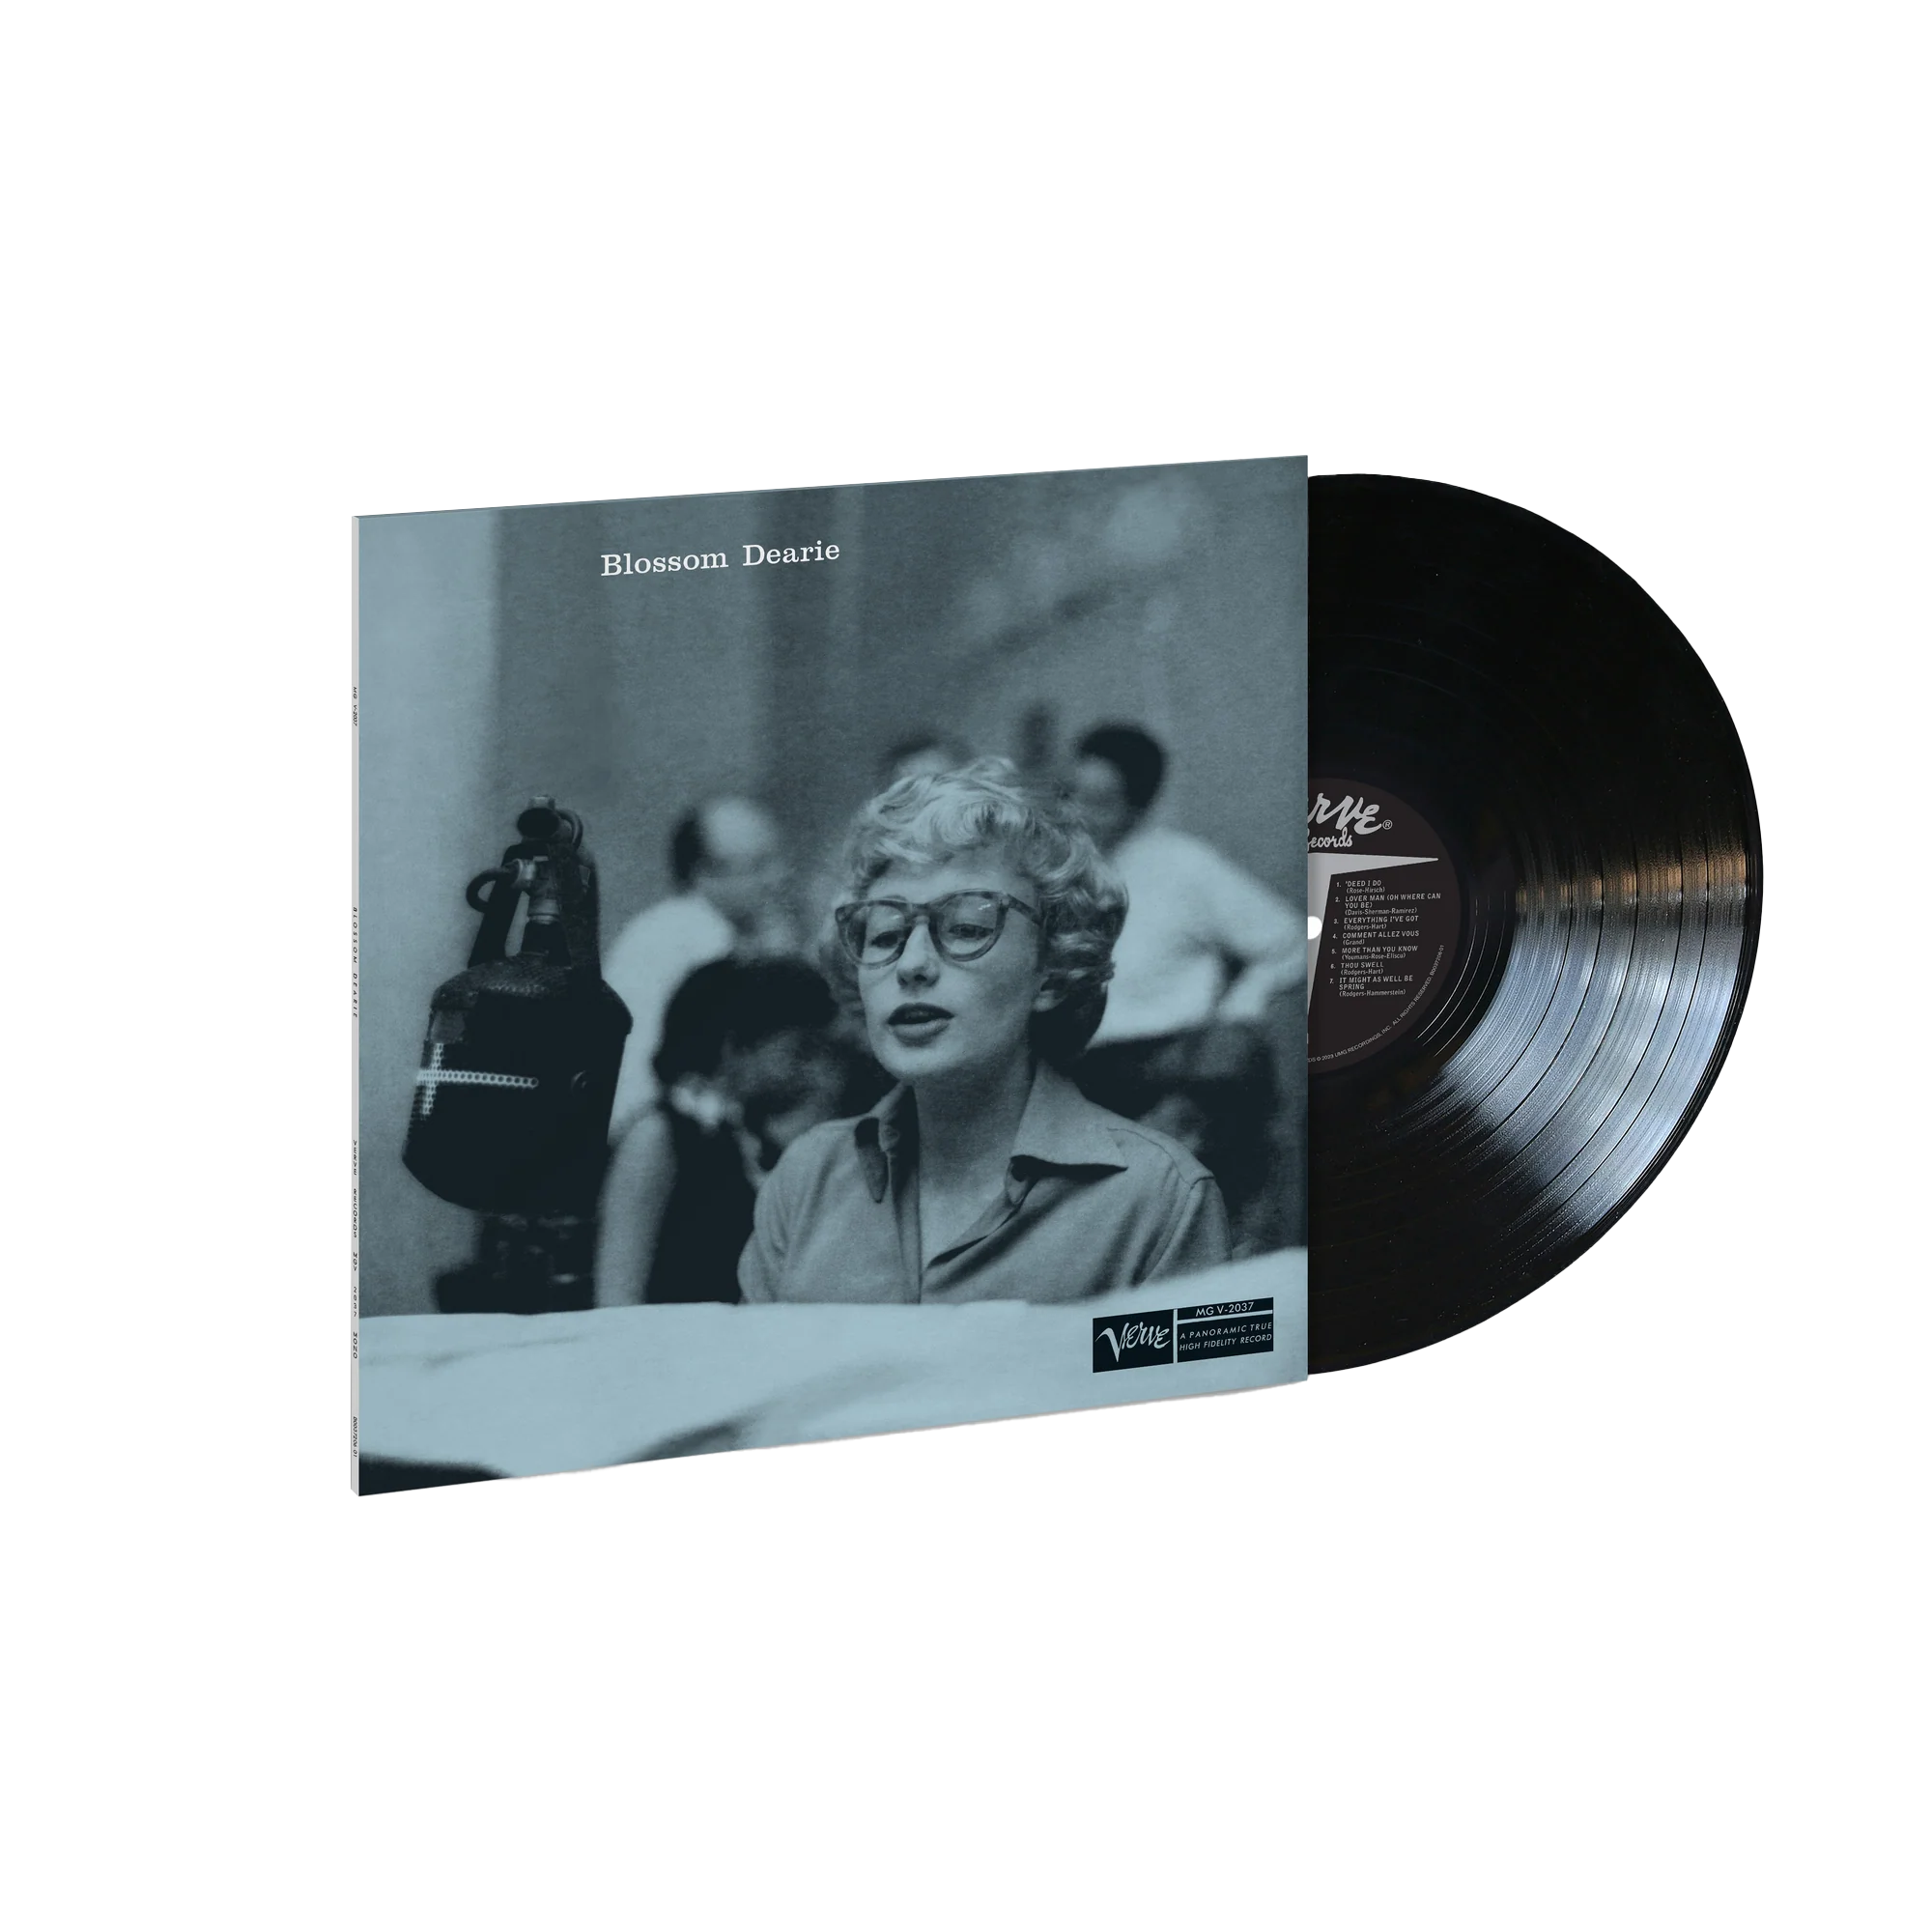 Blossom Dearie - Blossom Dearie (Verve By Request): Vinyl LP